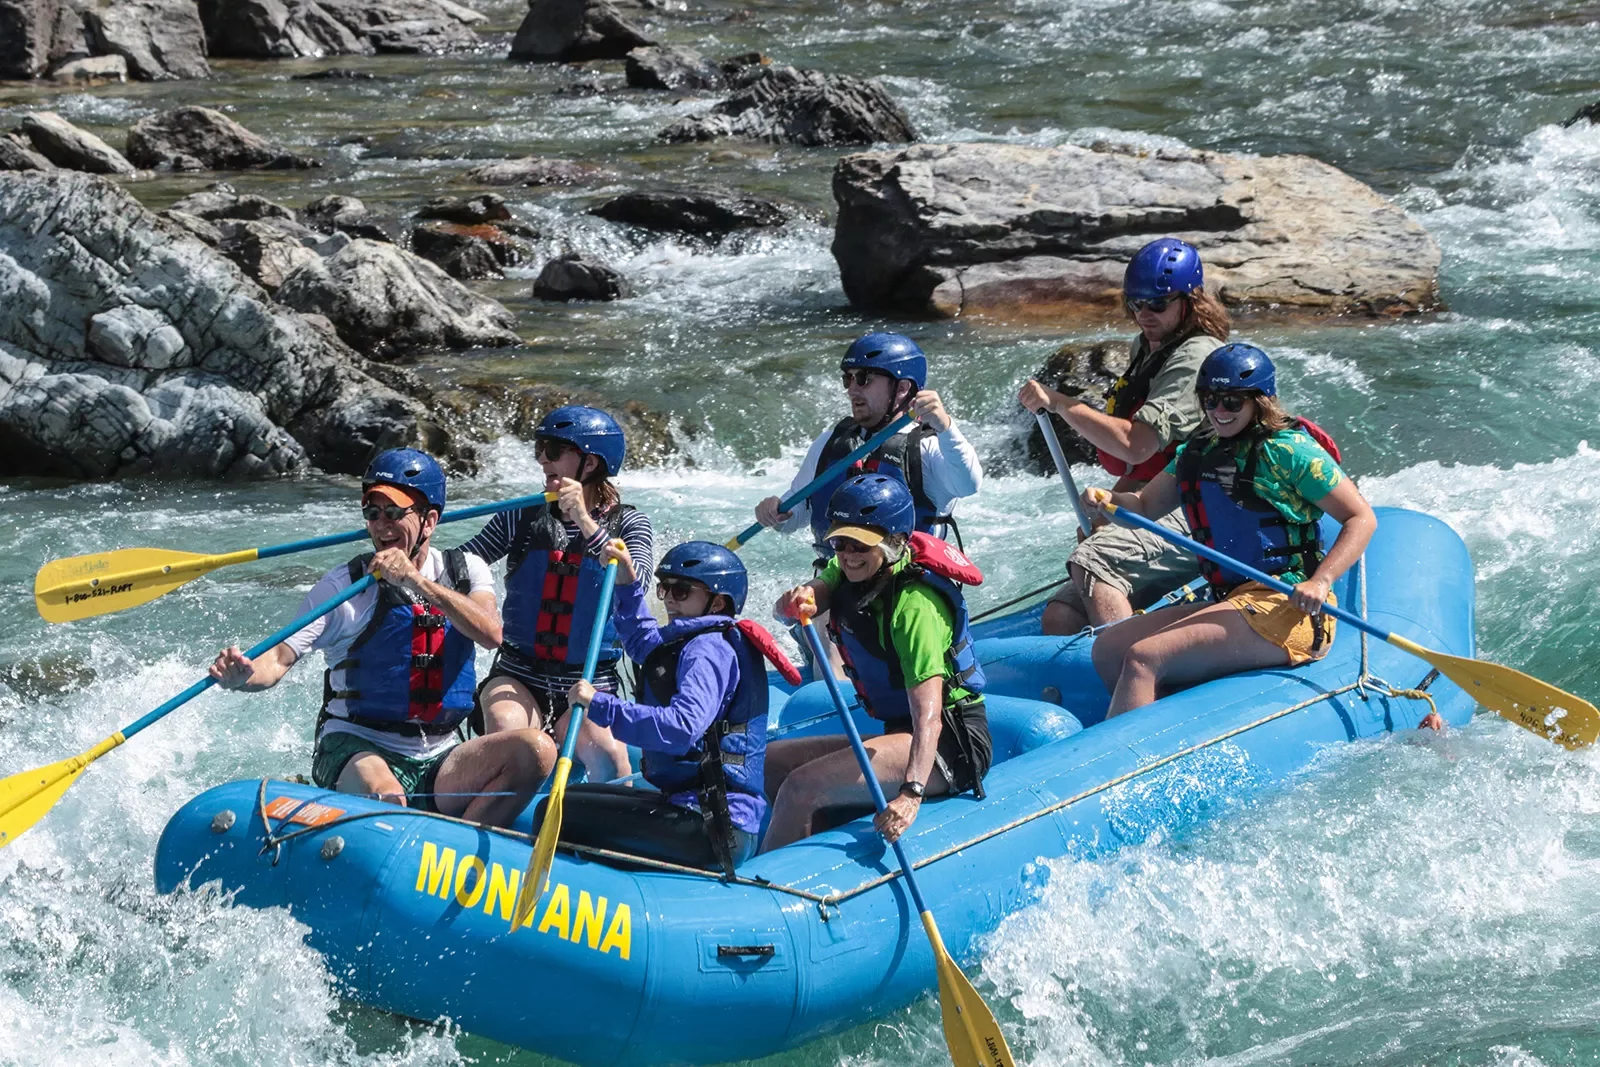 Backroads guests white water rafting